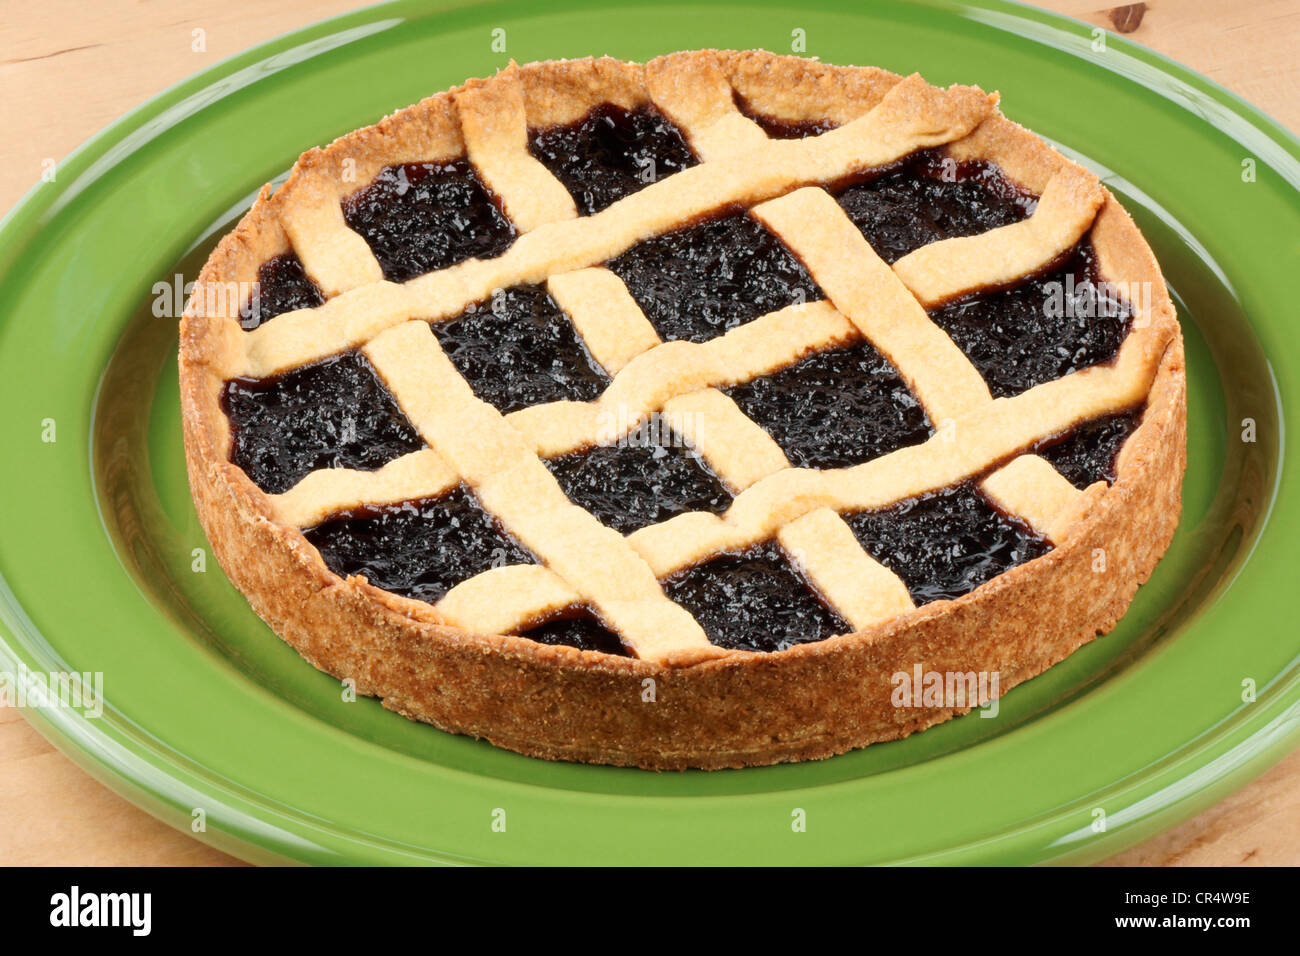 Homemade cherry jam tart on a green dish over a wooden background Stock Photo